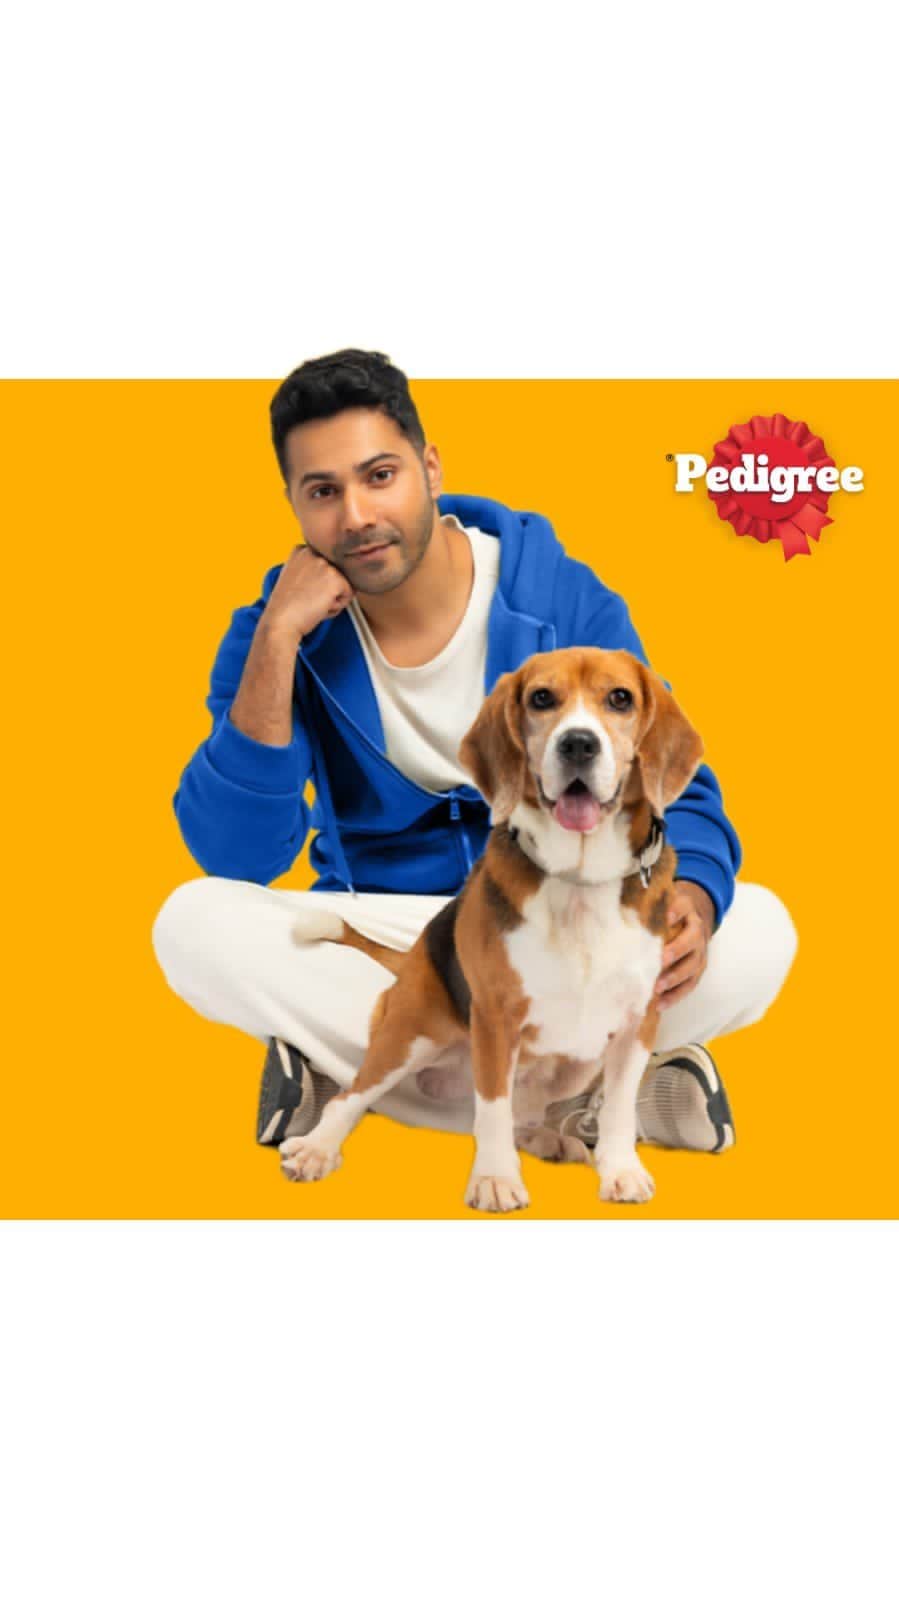 Varun Dhawanのインスタグラム：「Unlock your doggo’s star potential with Pedigree’s 100% Complete & Balanced enriched with 37 essential nutrients for healthy bones and muscles. #VarunBowledOverbyPedigree #PedigreeCompleteAndBalancedNutrition @pedigree_india」